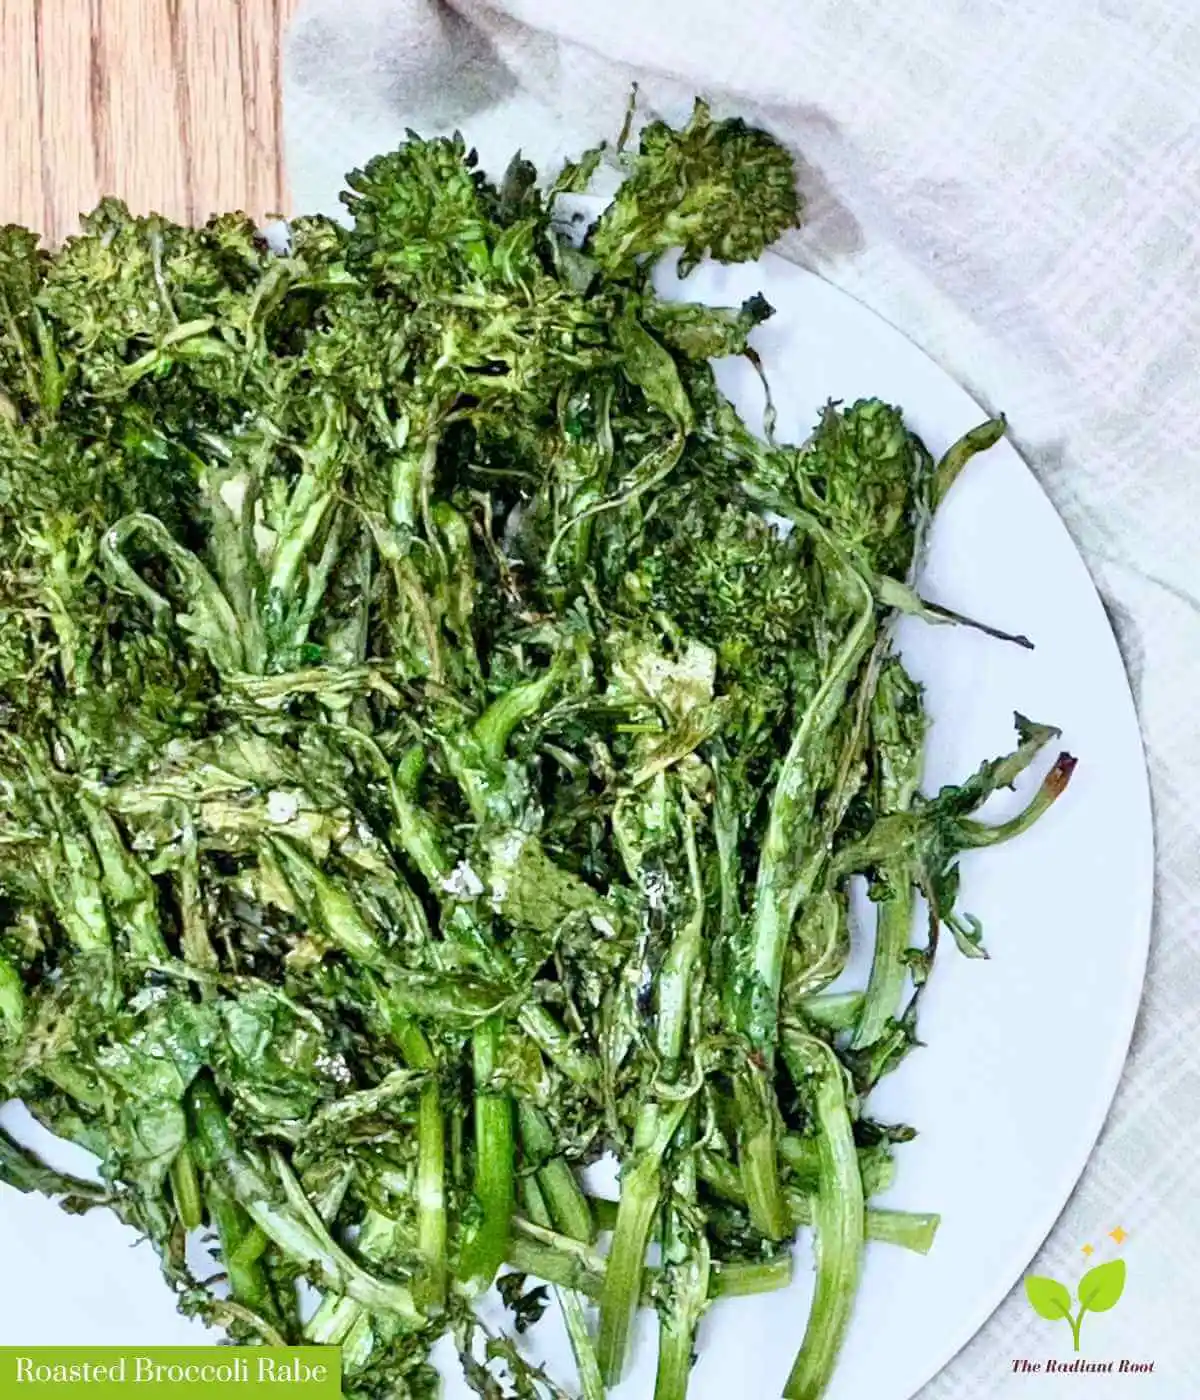 Broccoli rabe on a white plate with a beige kitchen towel on a wooden table | Roasted Broccoli Rabe | The Radiant Root